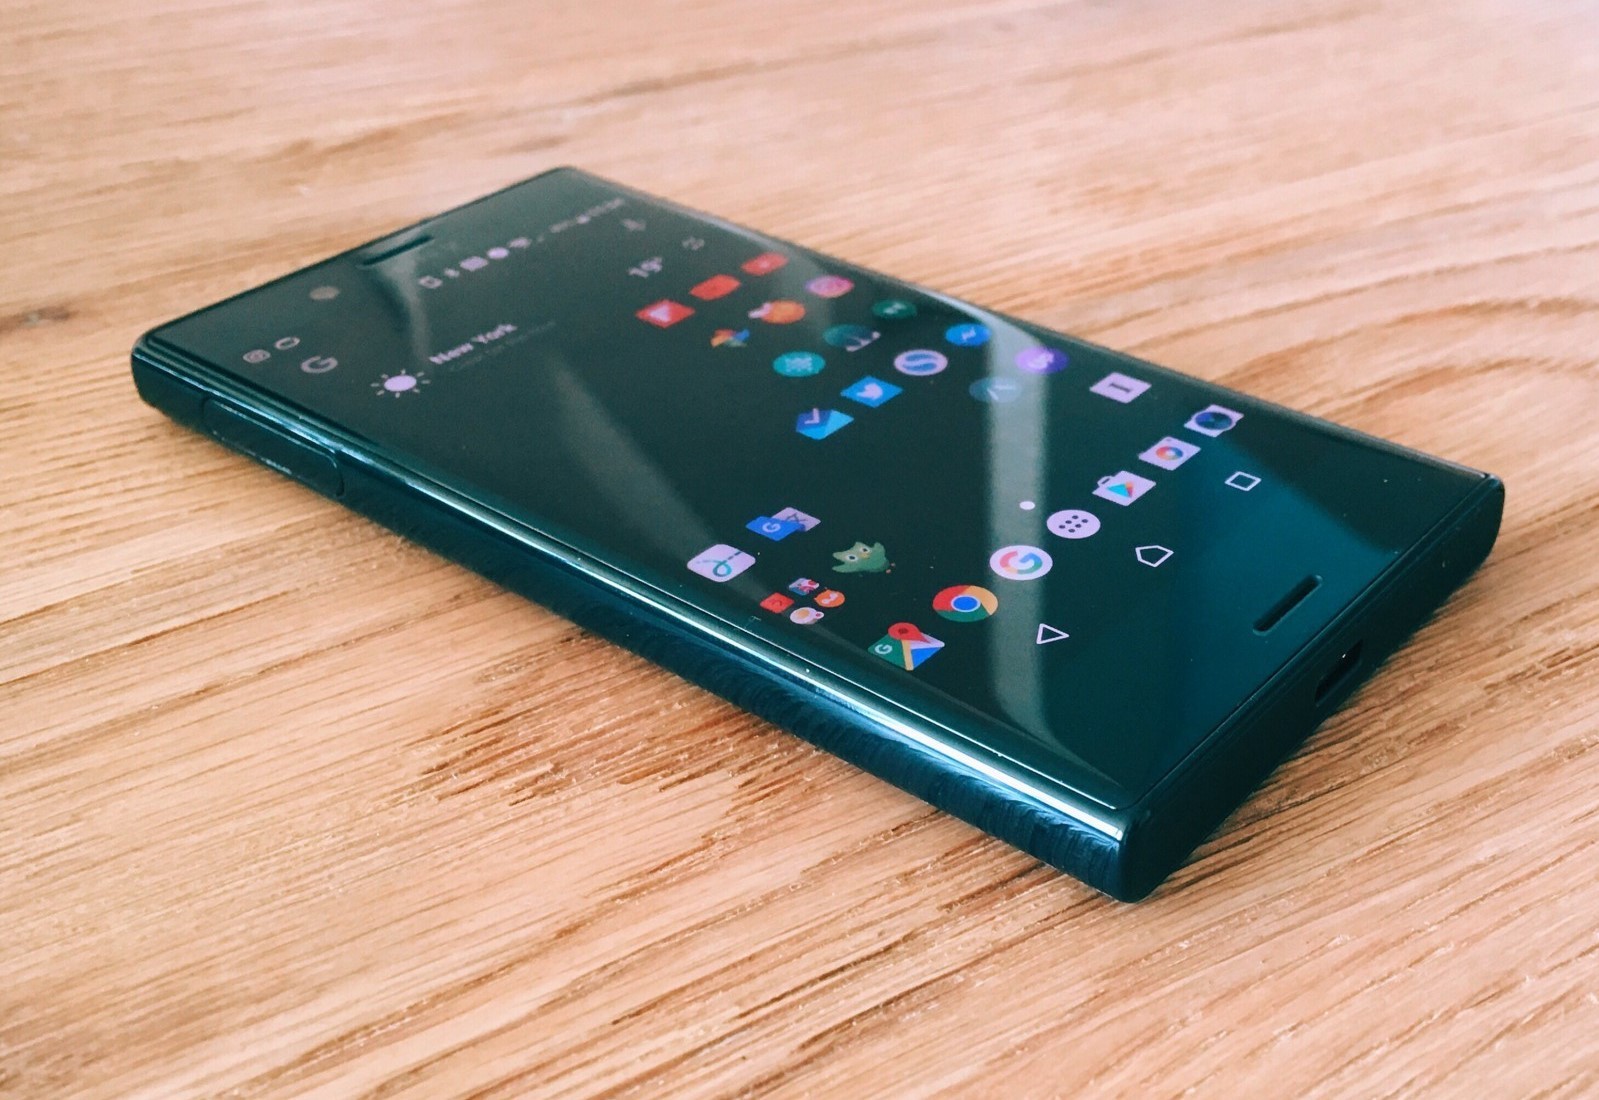 Xperia x compact. Sony Xperia x10 Compact. Xperia x3. Sony Xperia Compact 2019.